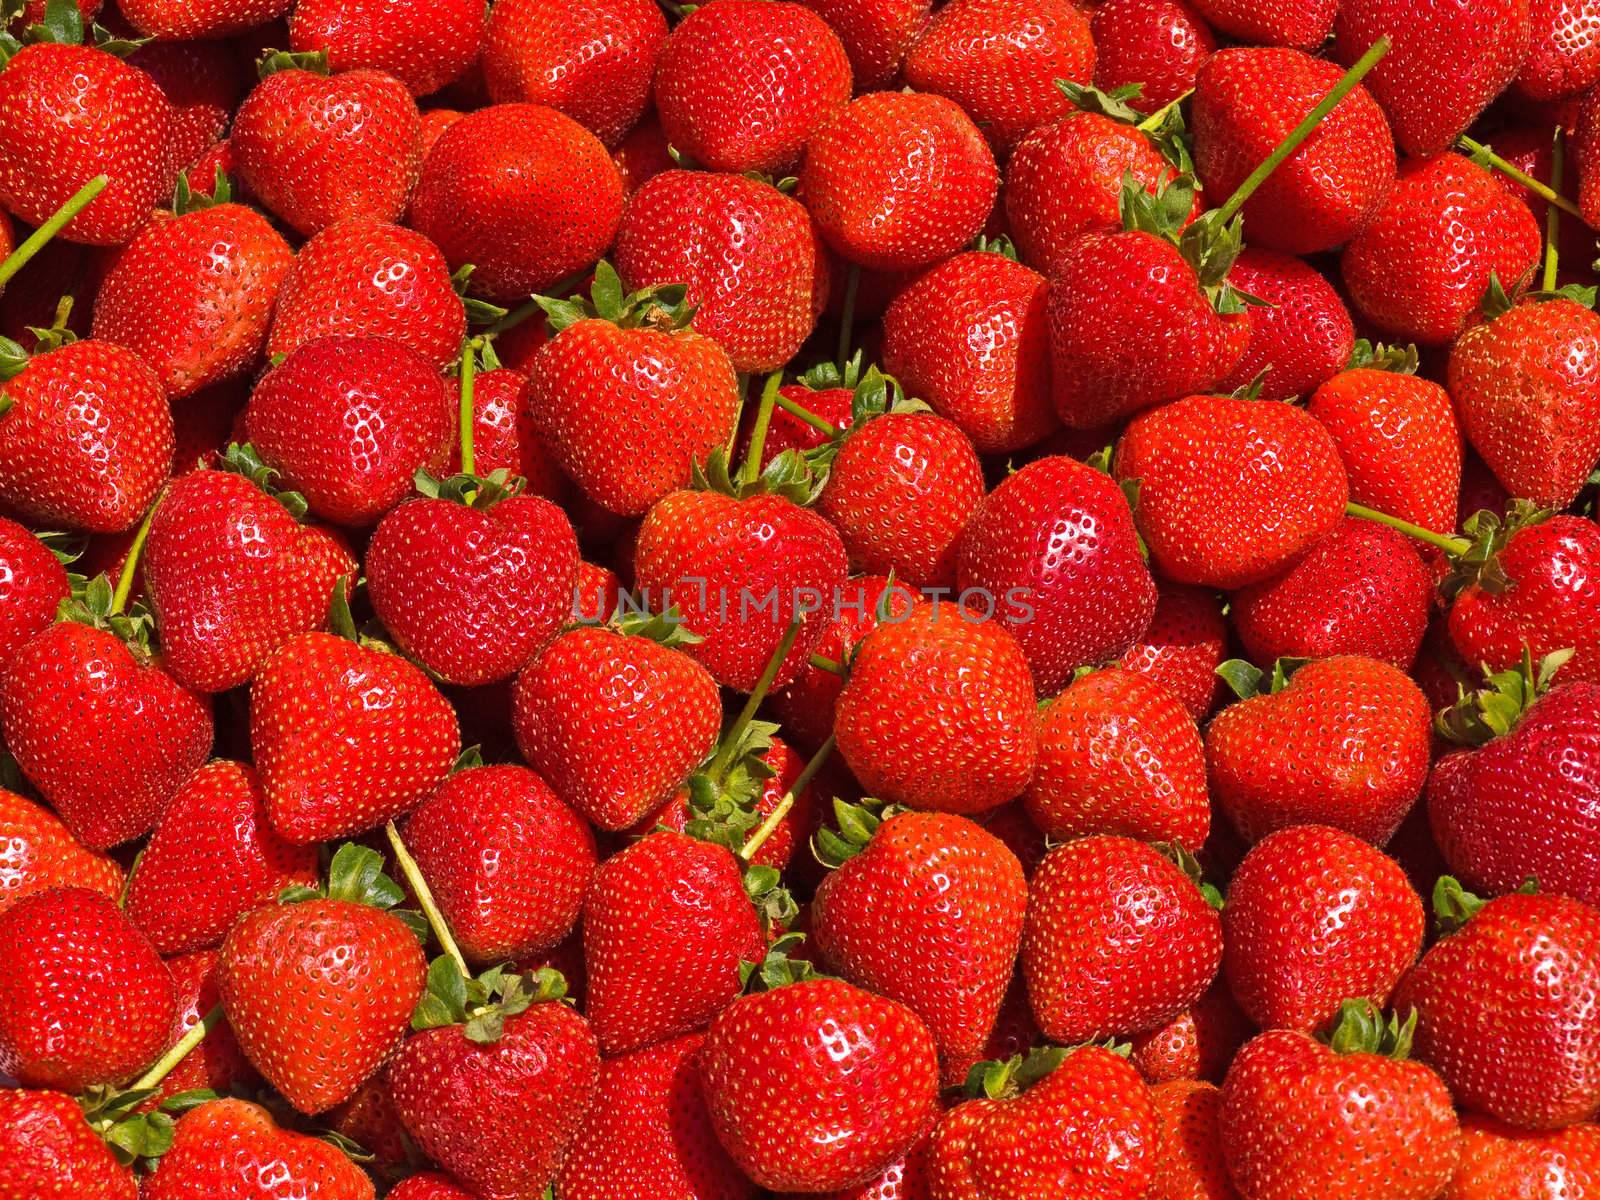 Ripe Red Strawberries at a Farmers Market by Frankljunior